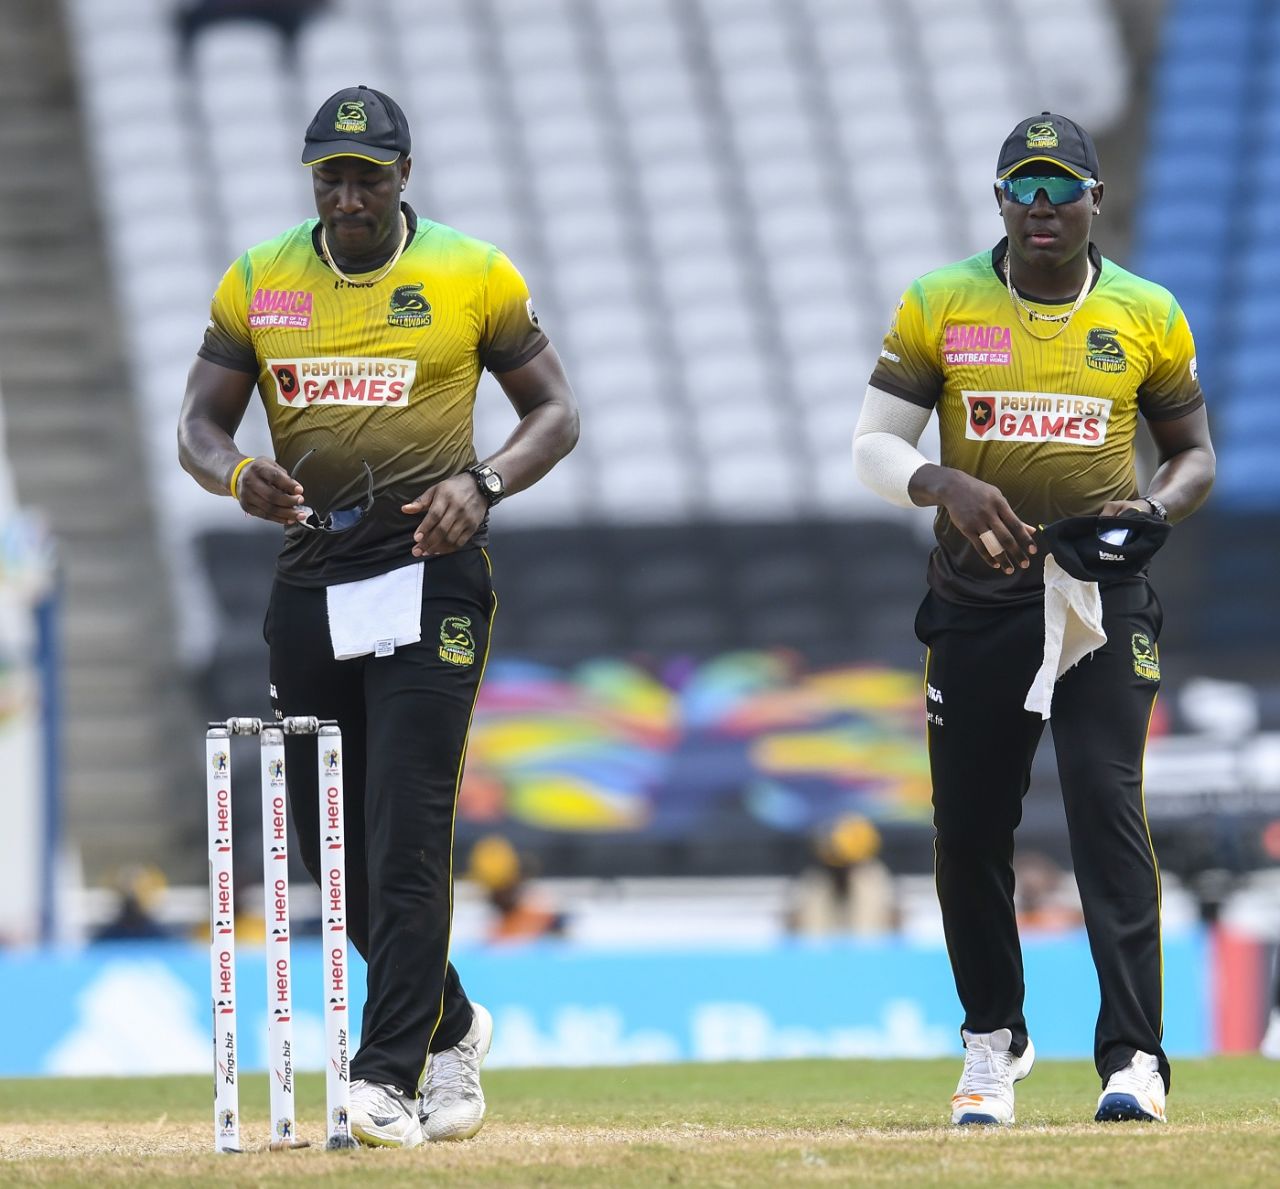 Jamaica Tallawahs will rely on Andre Russell and Rovman Powell to turn their fortunes around, Jamaica Tallawahs v St Lucia Zouks, Trinidad, CPL 2020, August 19, 2020